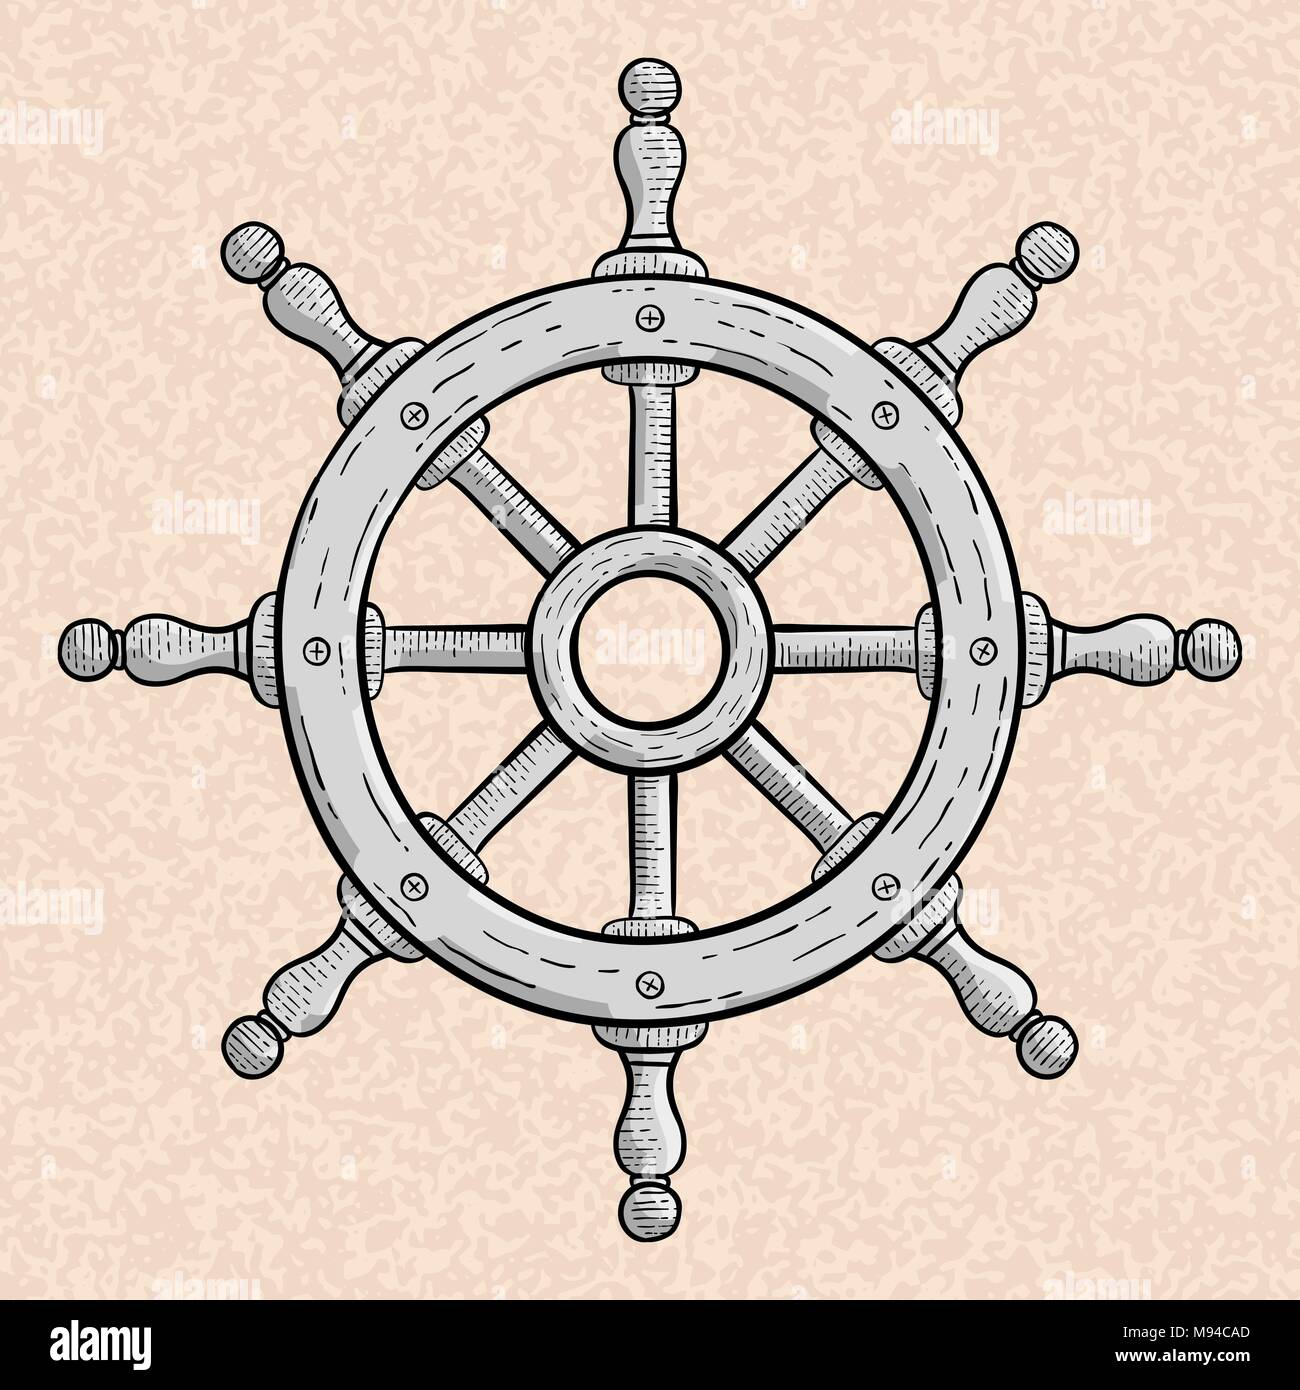 Steering wheel for ships and boats. Hand drawn sketch Stock Vector